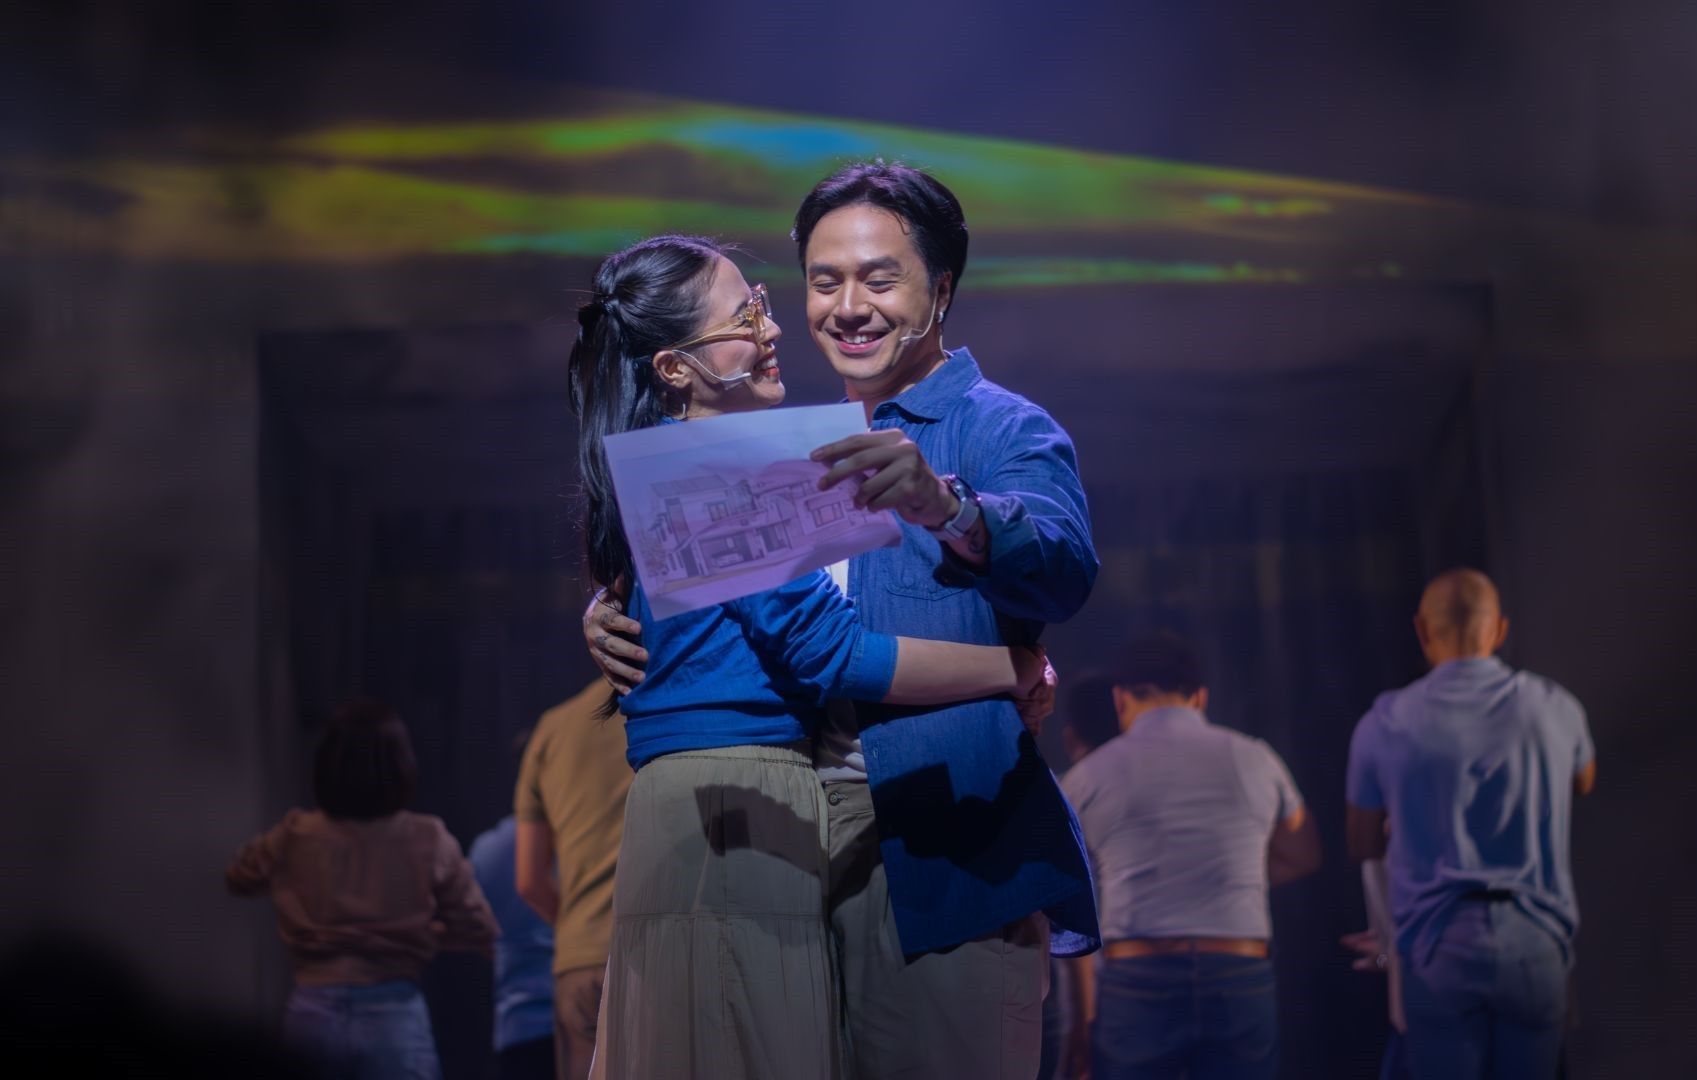 Ben&amp;Ben songs shine in ‘One More Chance’ musical